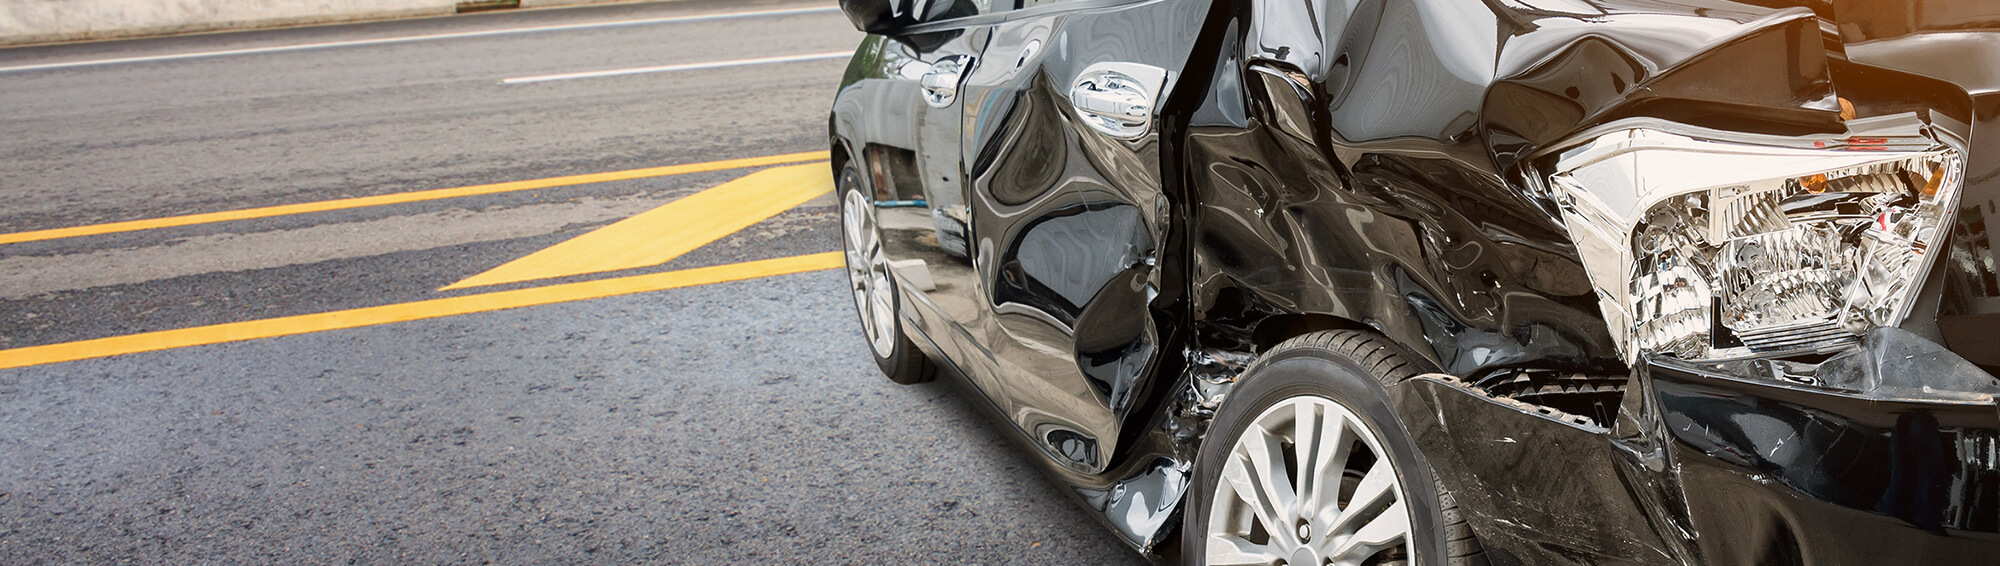 The Clock Is Ticking After a Car Accident. Don’t Wait to Get the Help You Need.